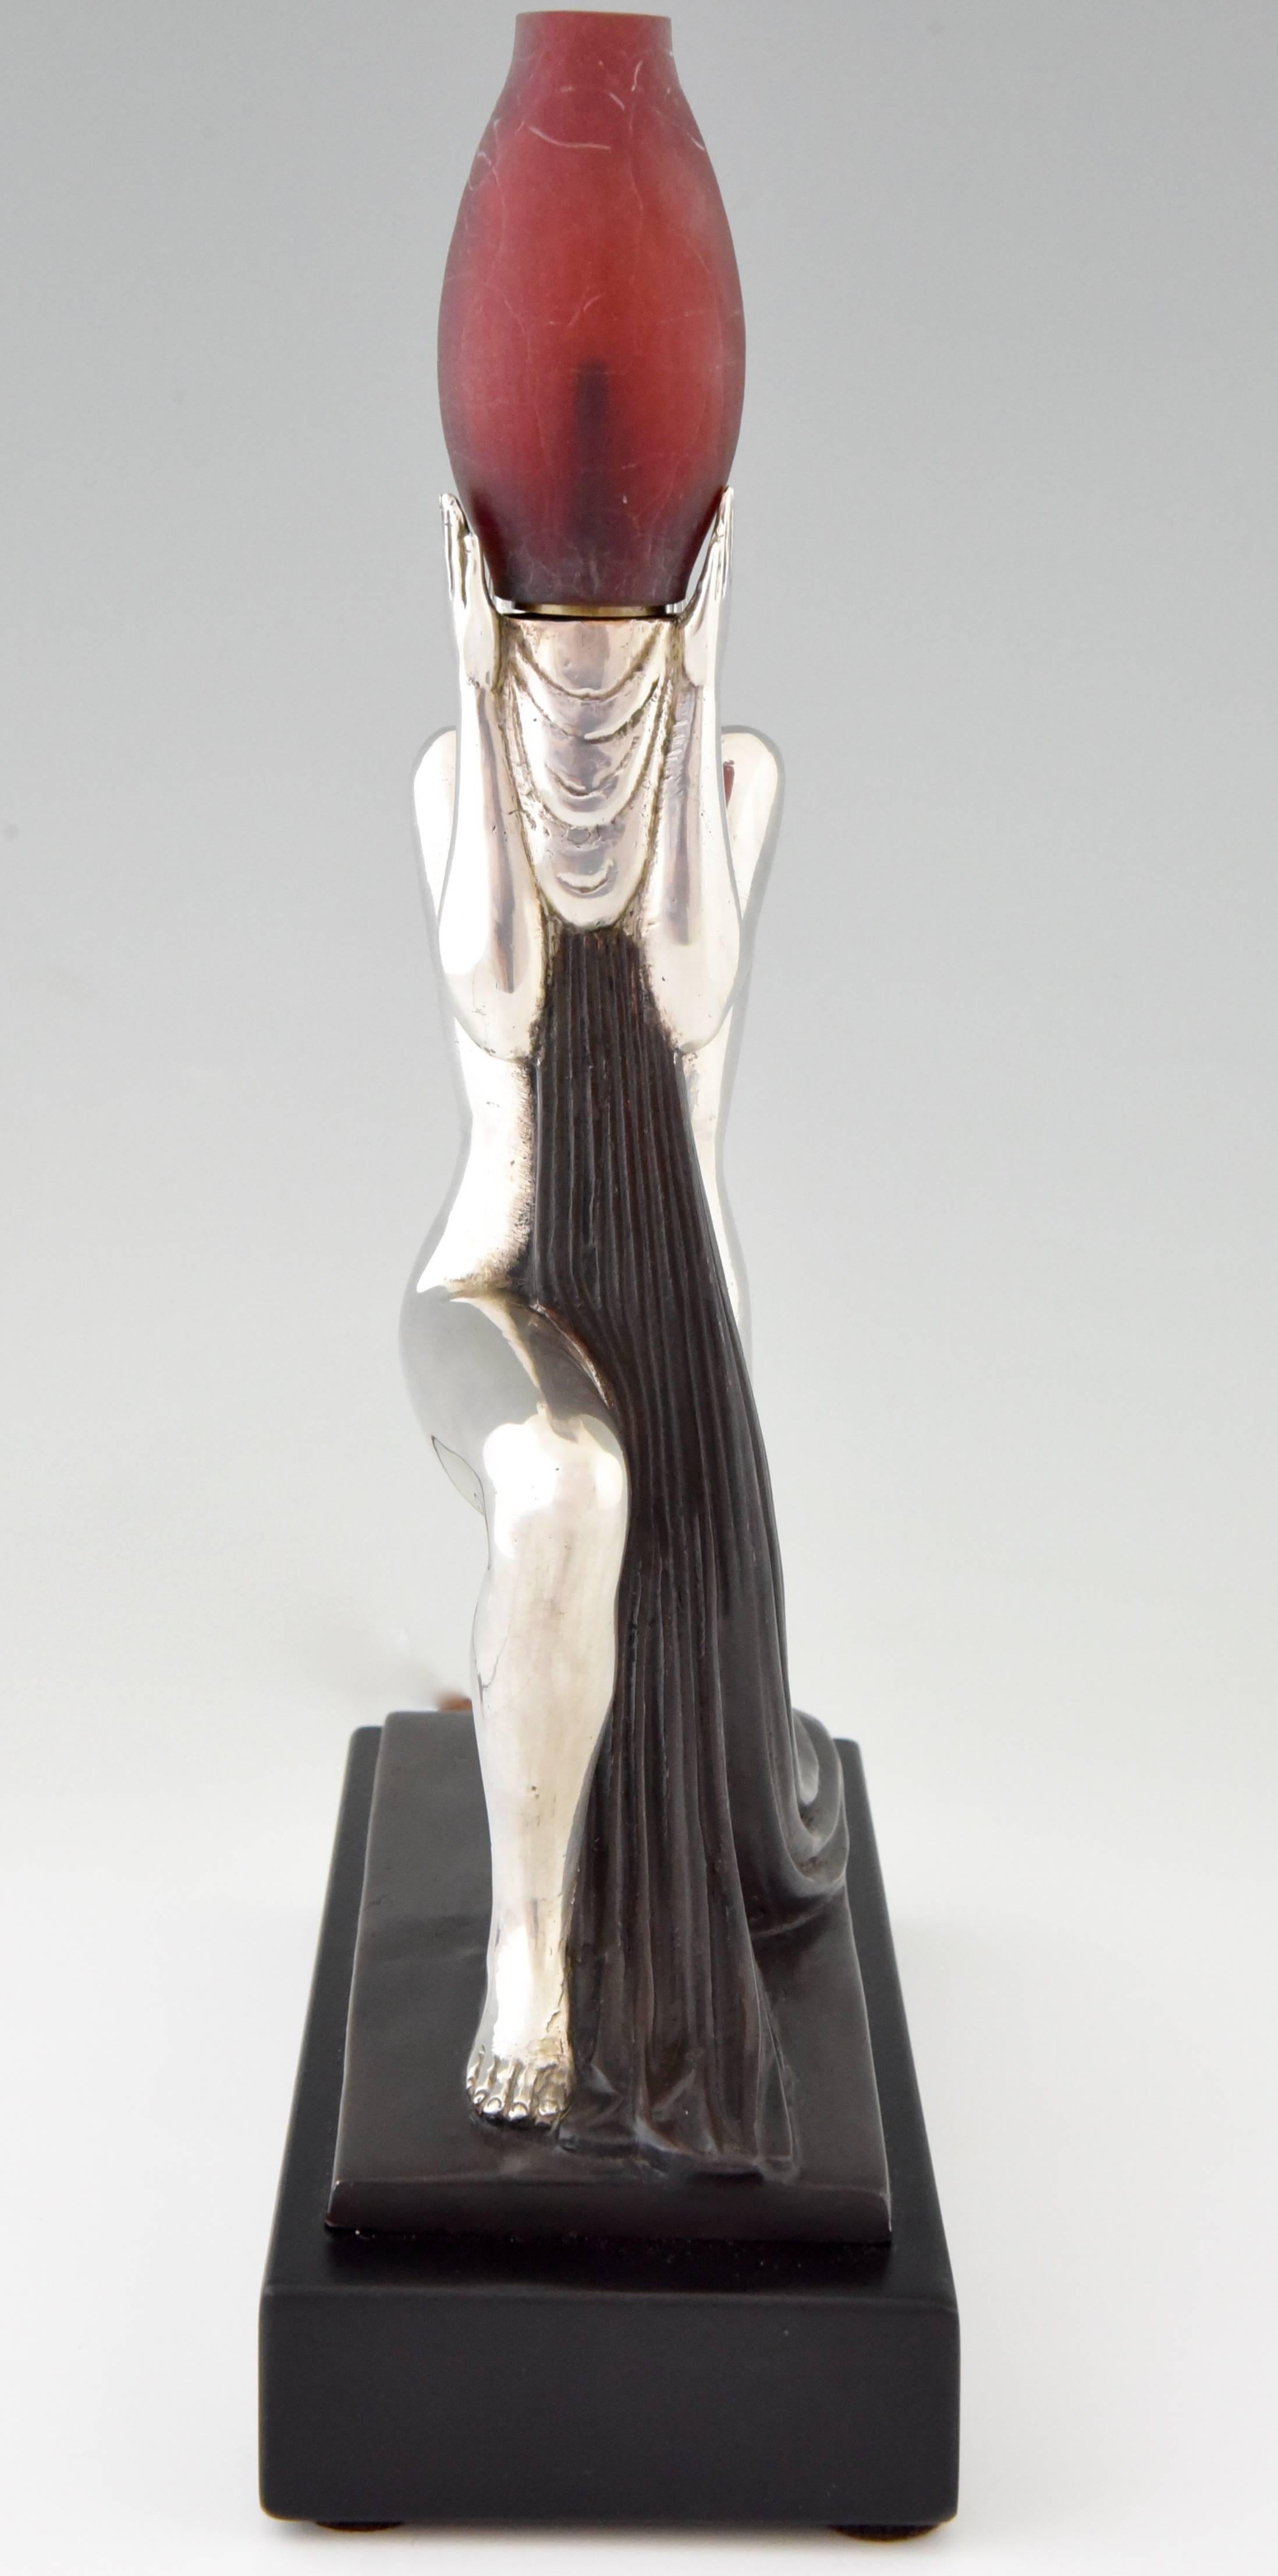 20th Century French Art Deco Lamp with Nude, Silvered Bronze and Glass by Guerbe, 1930